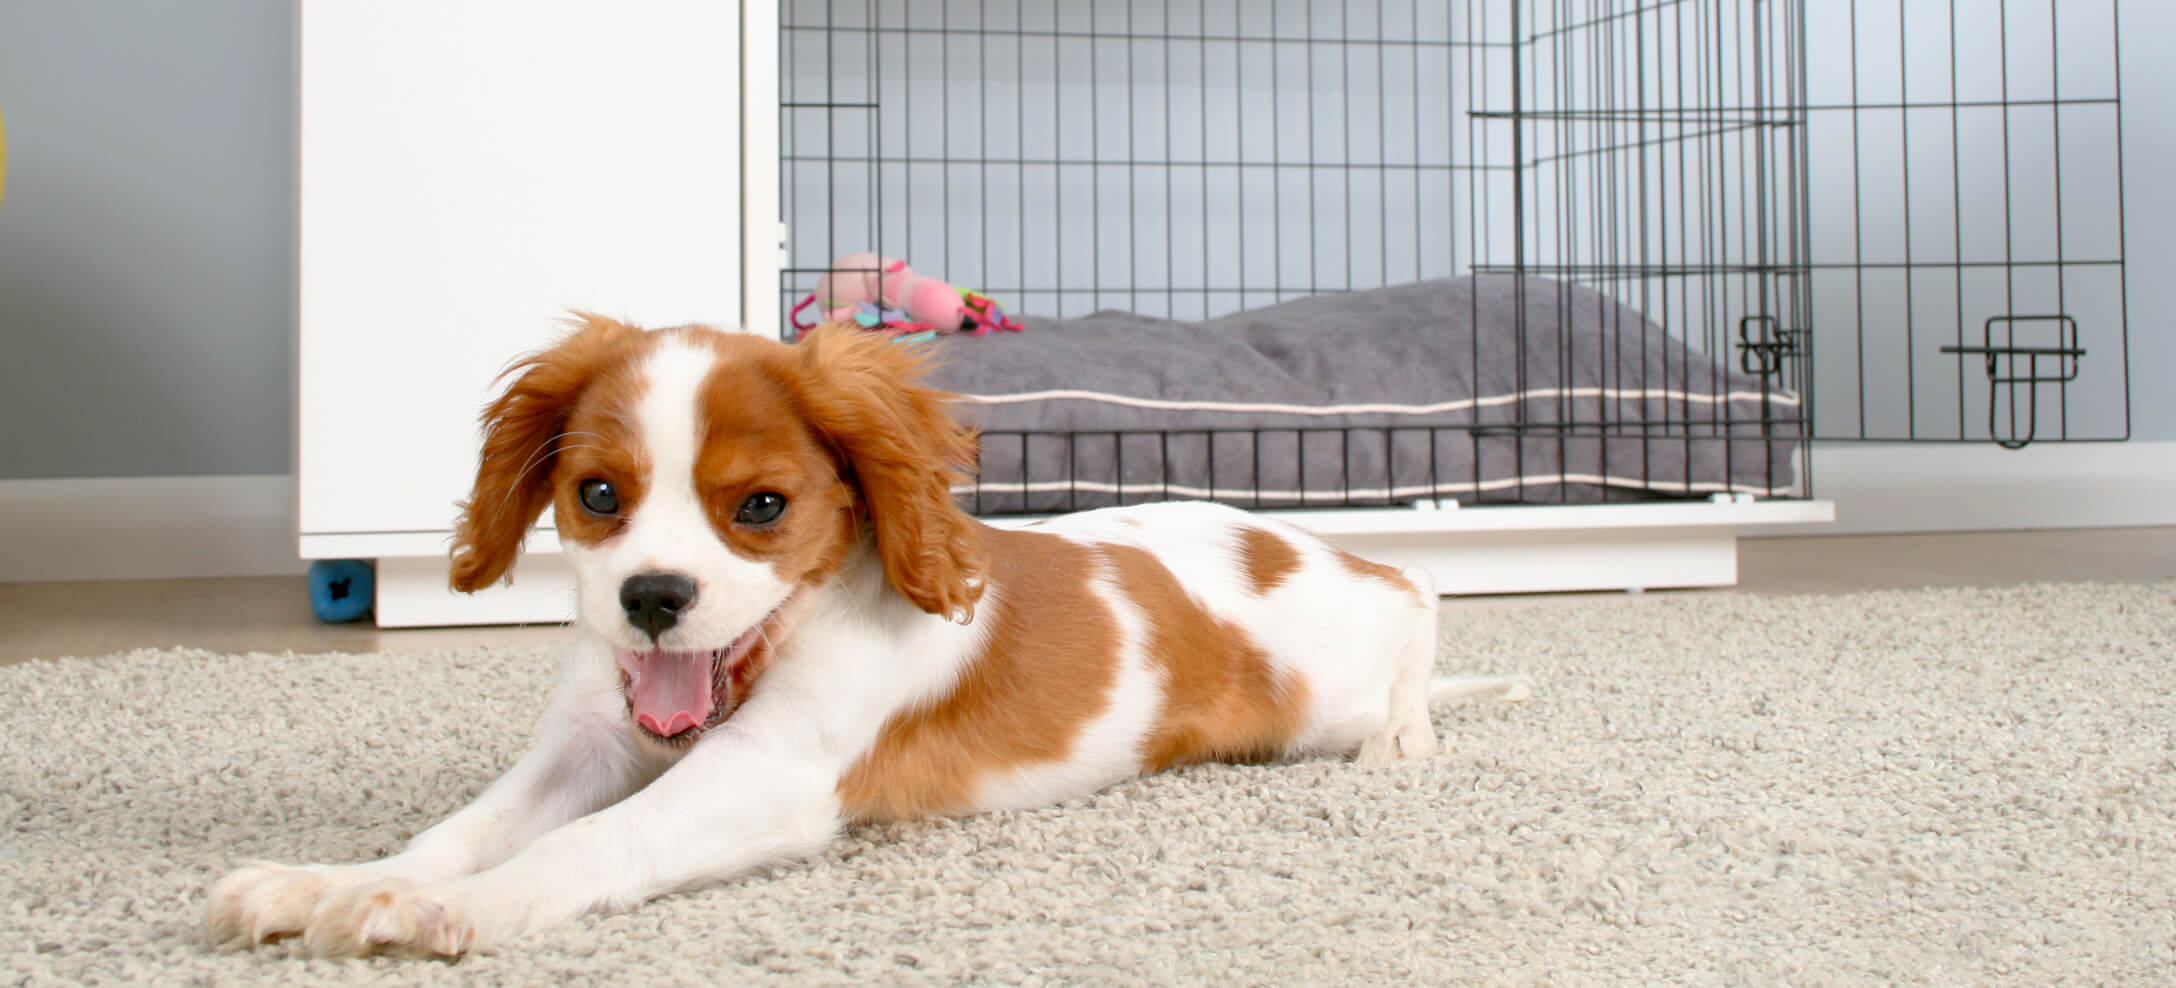 A big stretch and yawn for this cavalier King Charles spaniel puppy